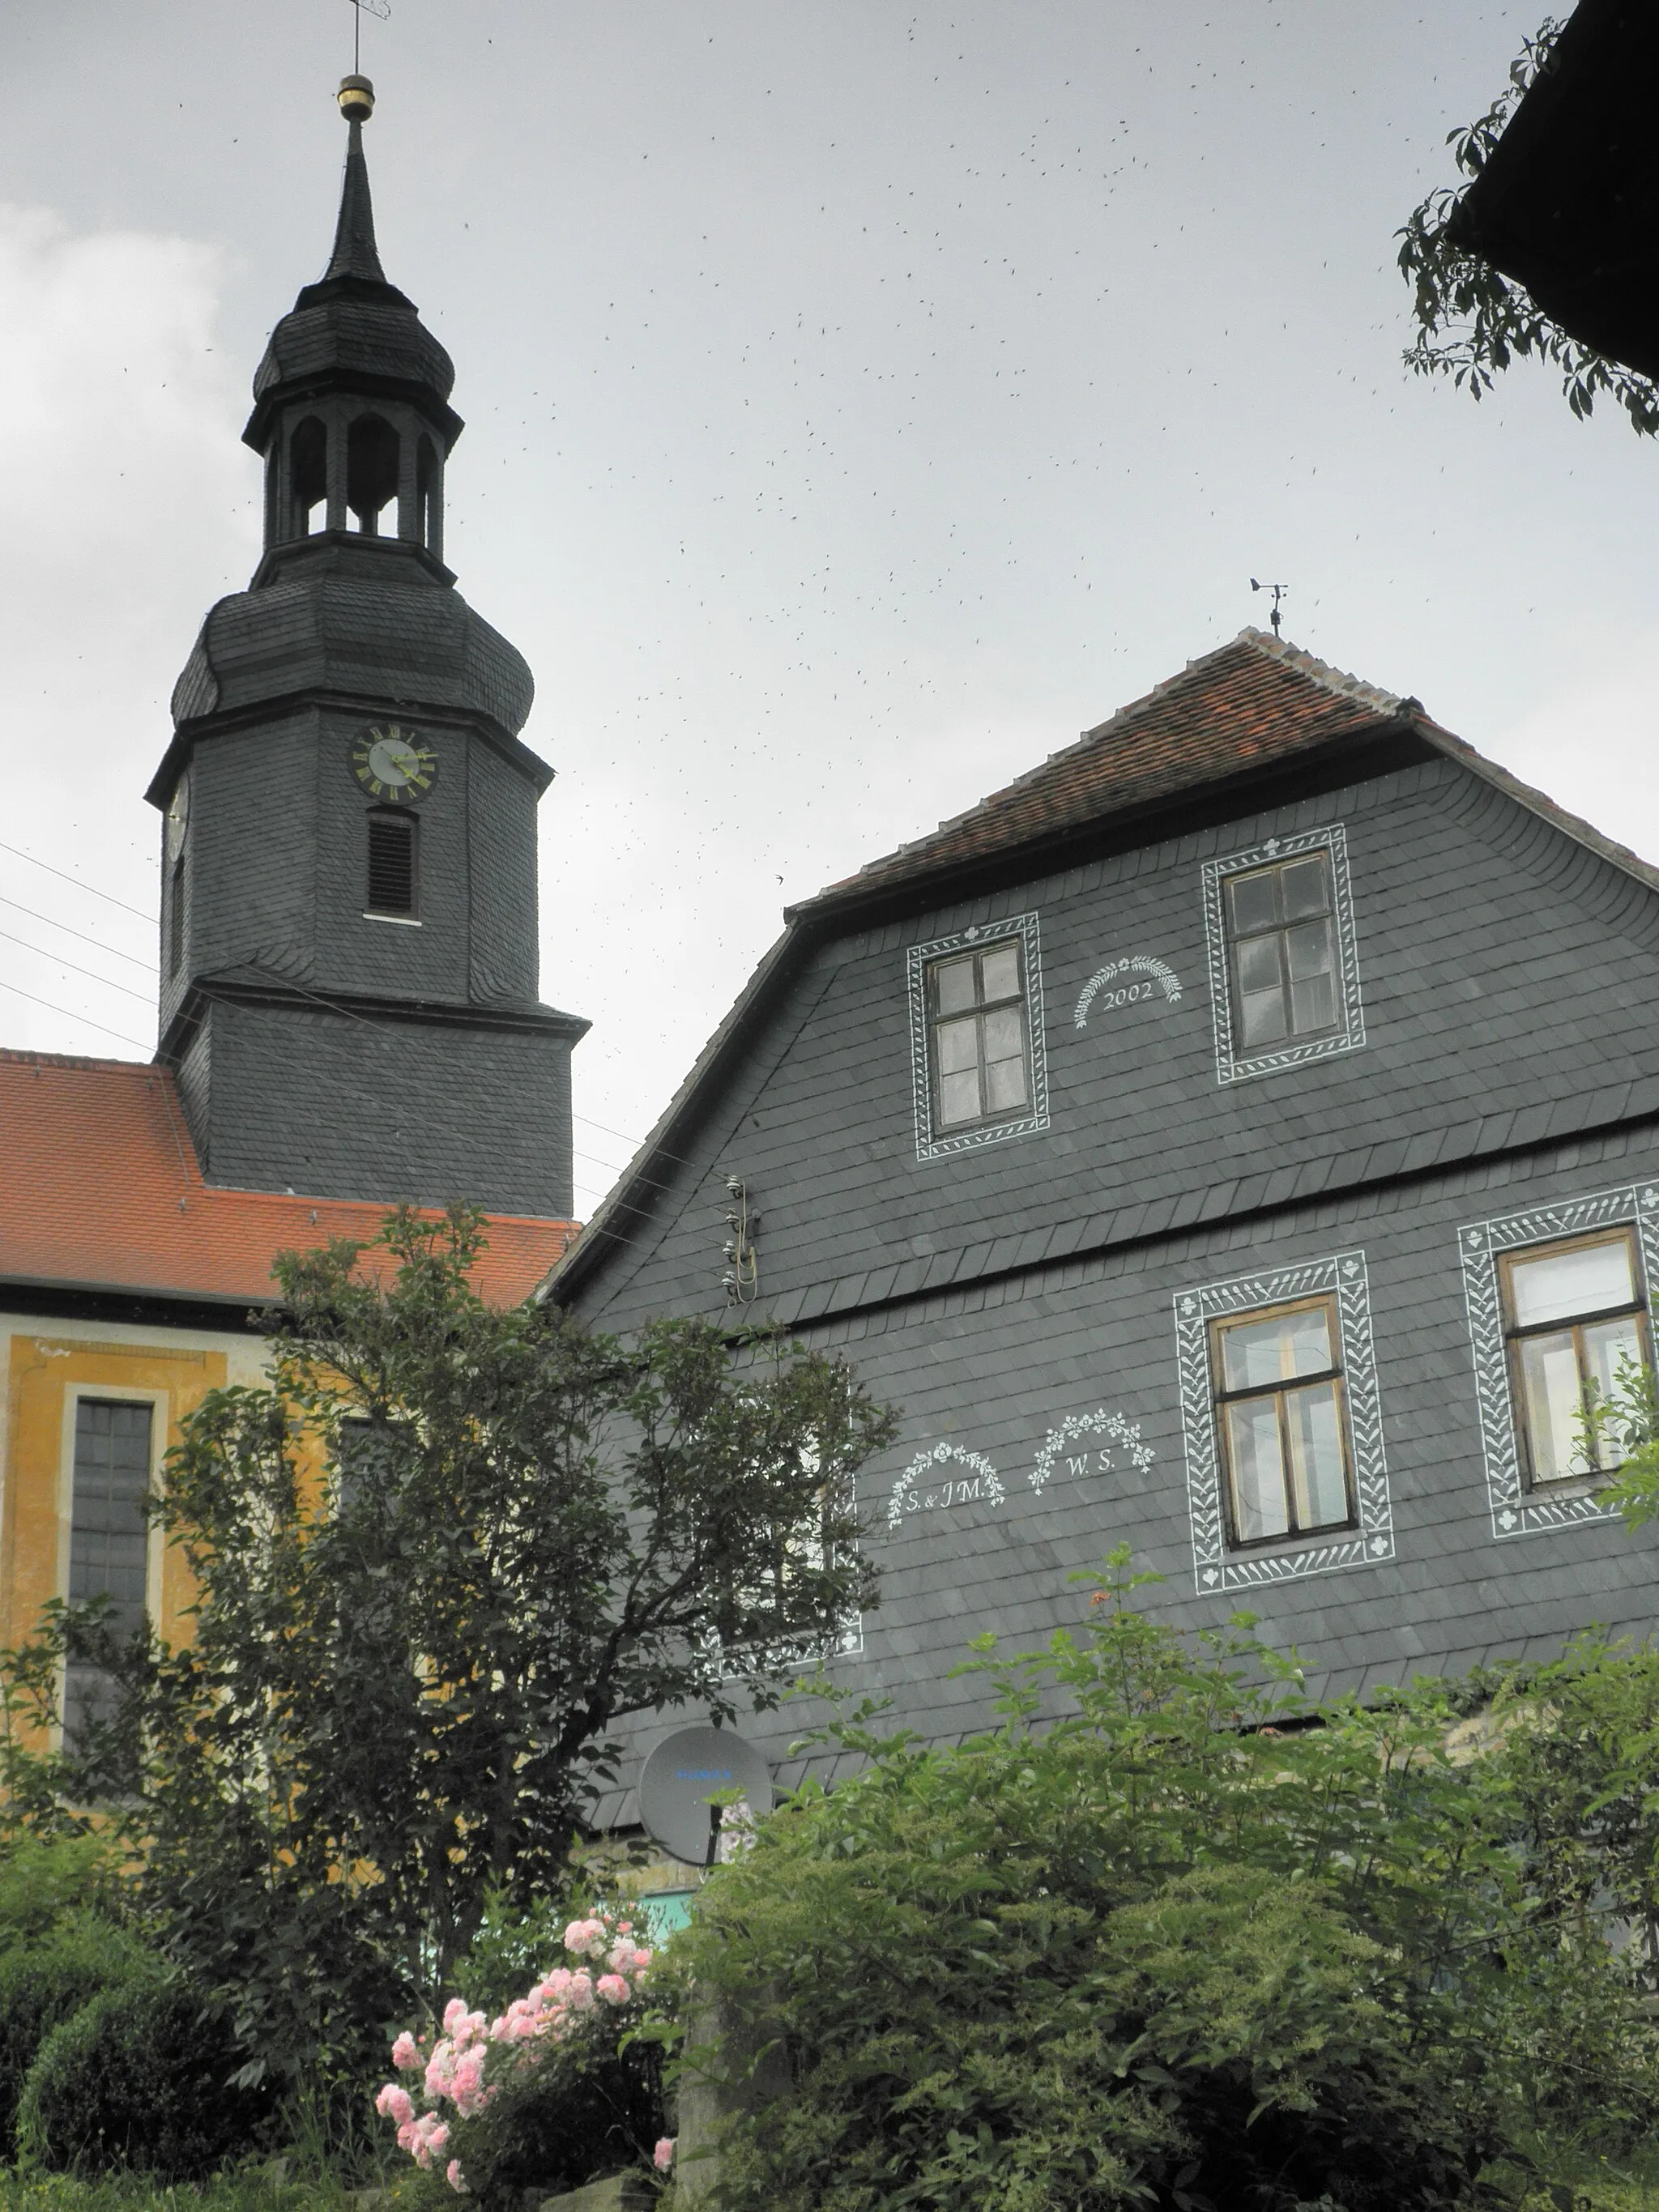 Photo showing: Church Tower and Parsonage in Bremsnitz in Thuringia